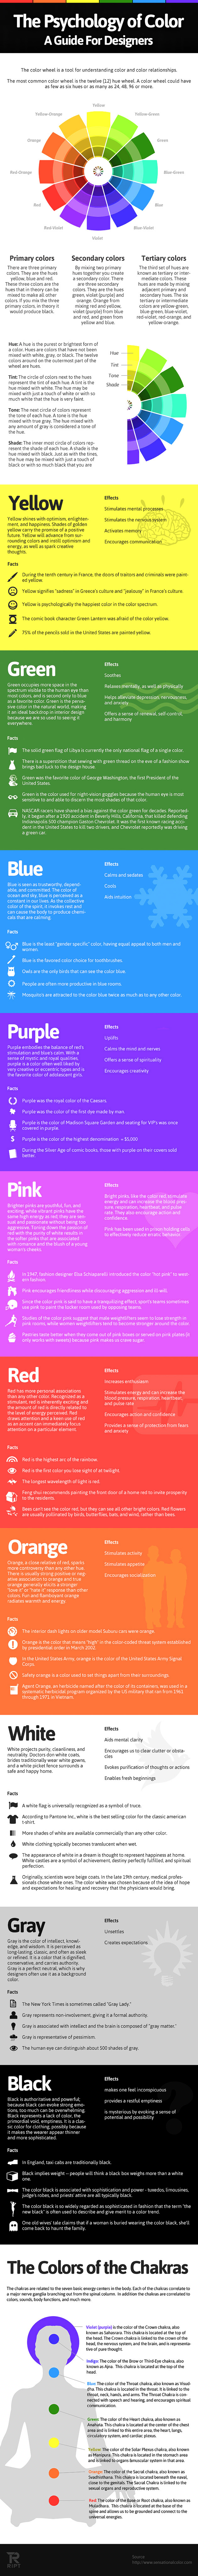 The Psychology of Colors - A Guide for Designers (Infographic)